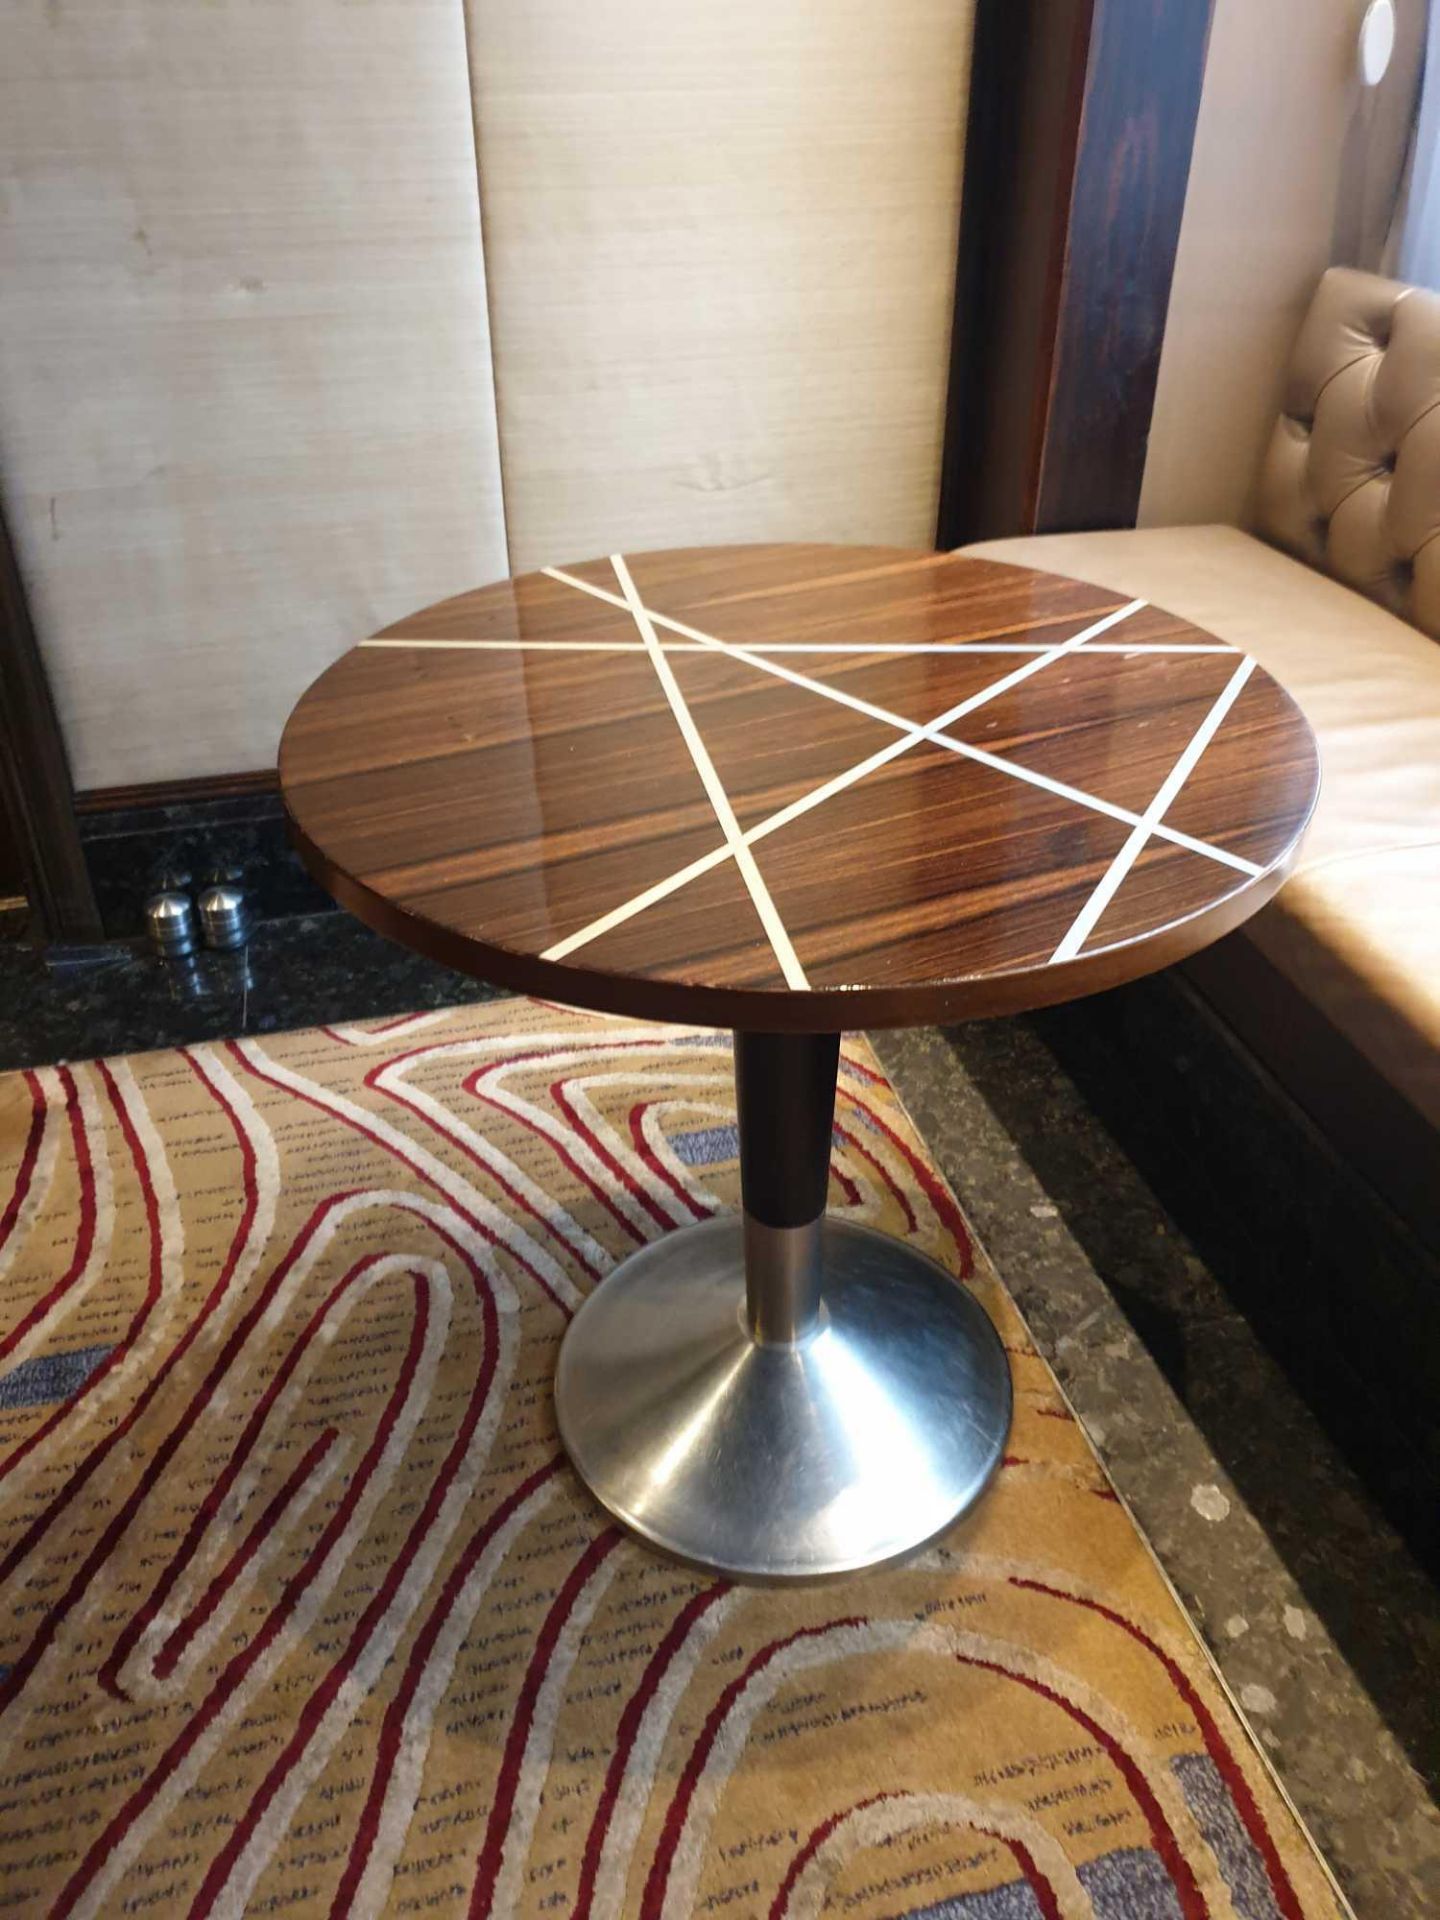 Dining Table Finished In Polished Macassar Ebony Starburst With Metal Inlay Stainless Steel Base - Bild 2 aus 2